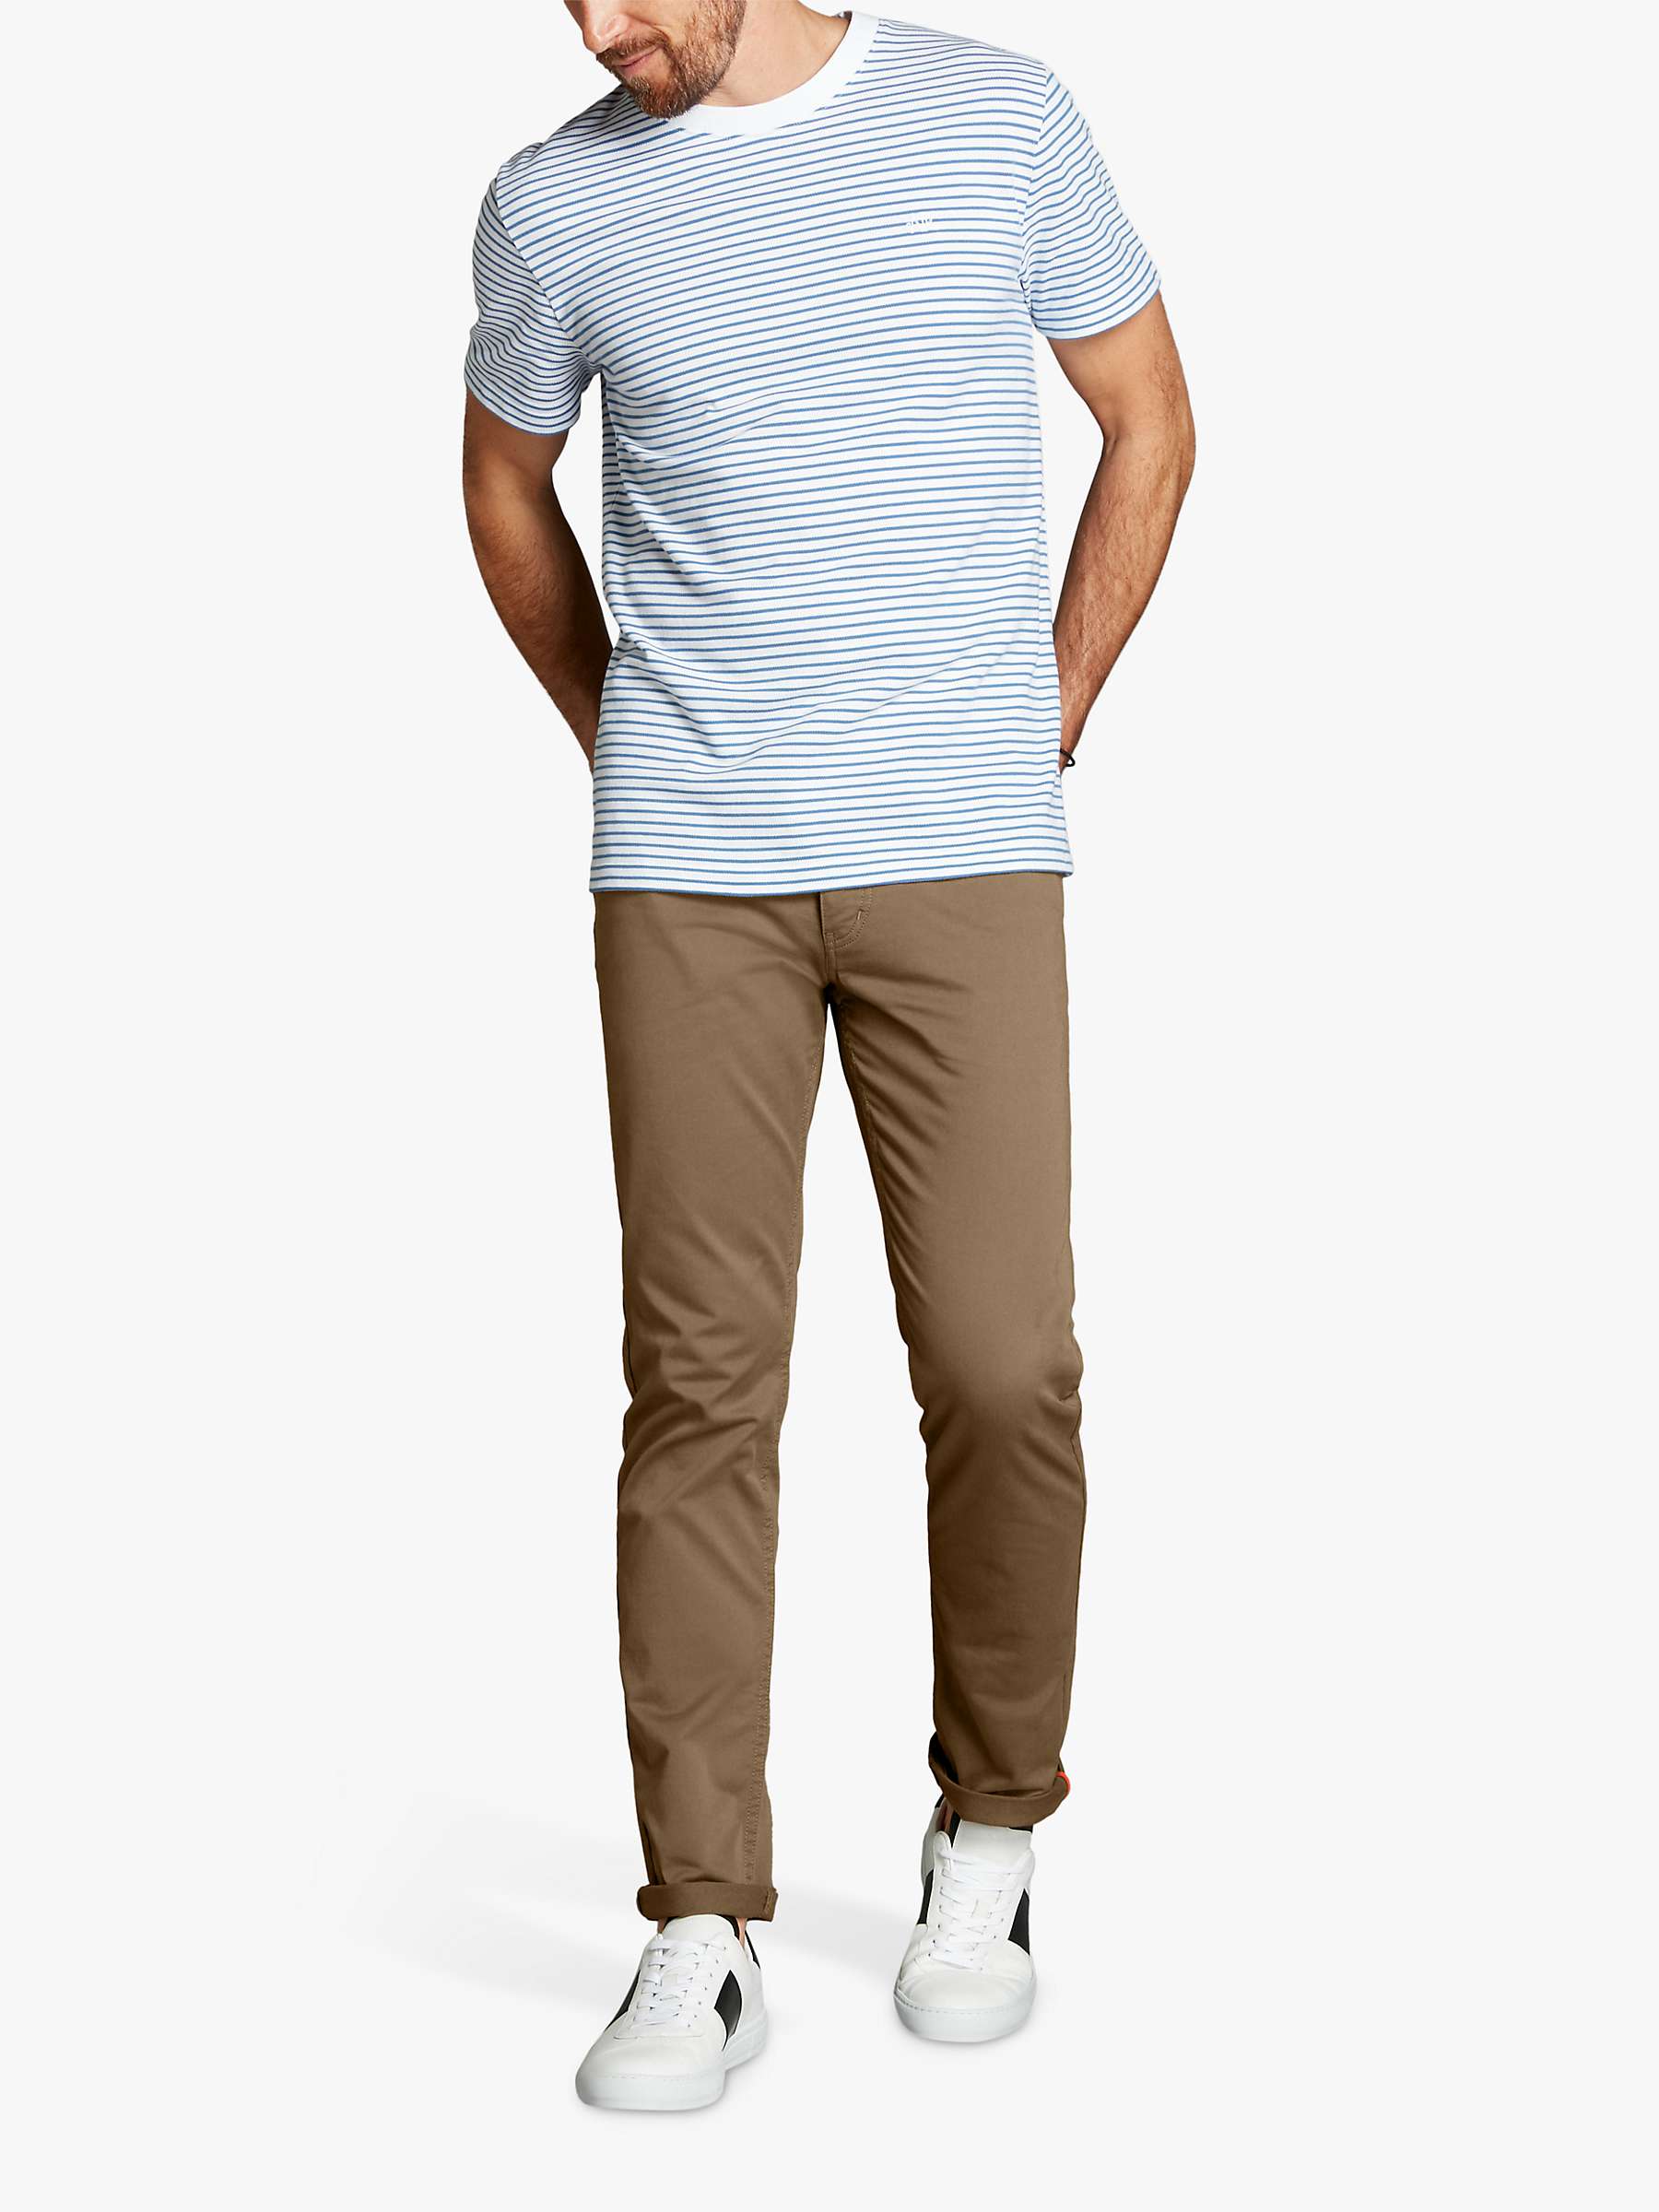 Buy SPOKE Fives Cotton Blend Narrow Thigh Chinos Online at johnlewis.com